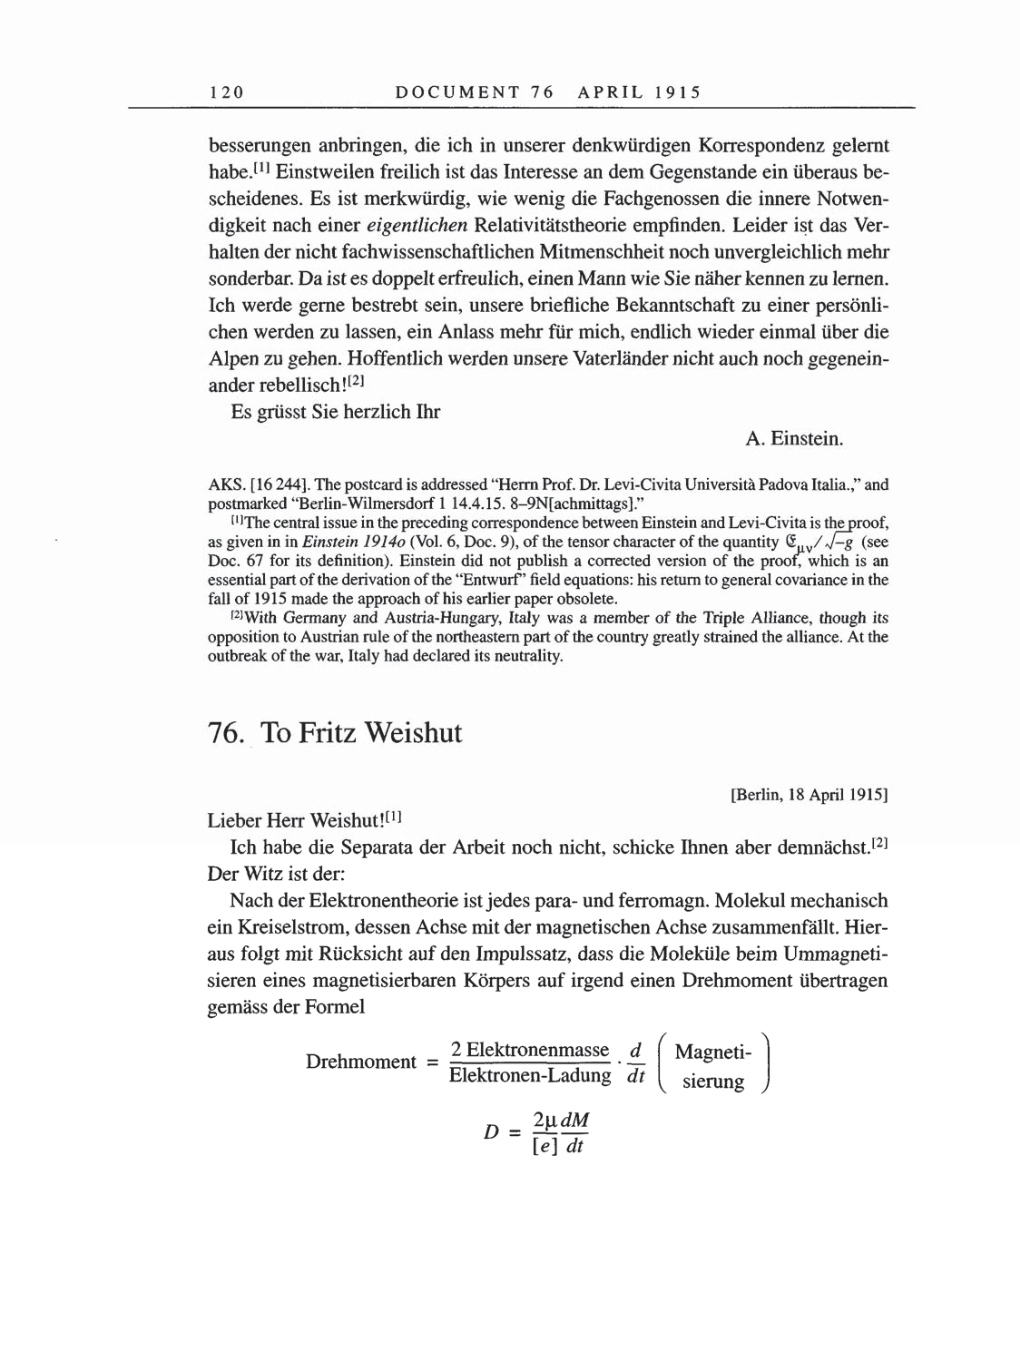 Volume 8, Part A: The Berlin Years: Correspondence 1914-1917 page 120